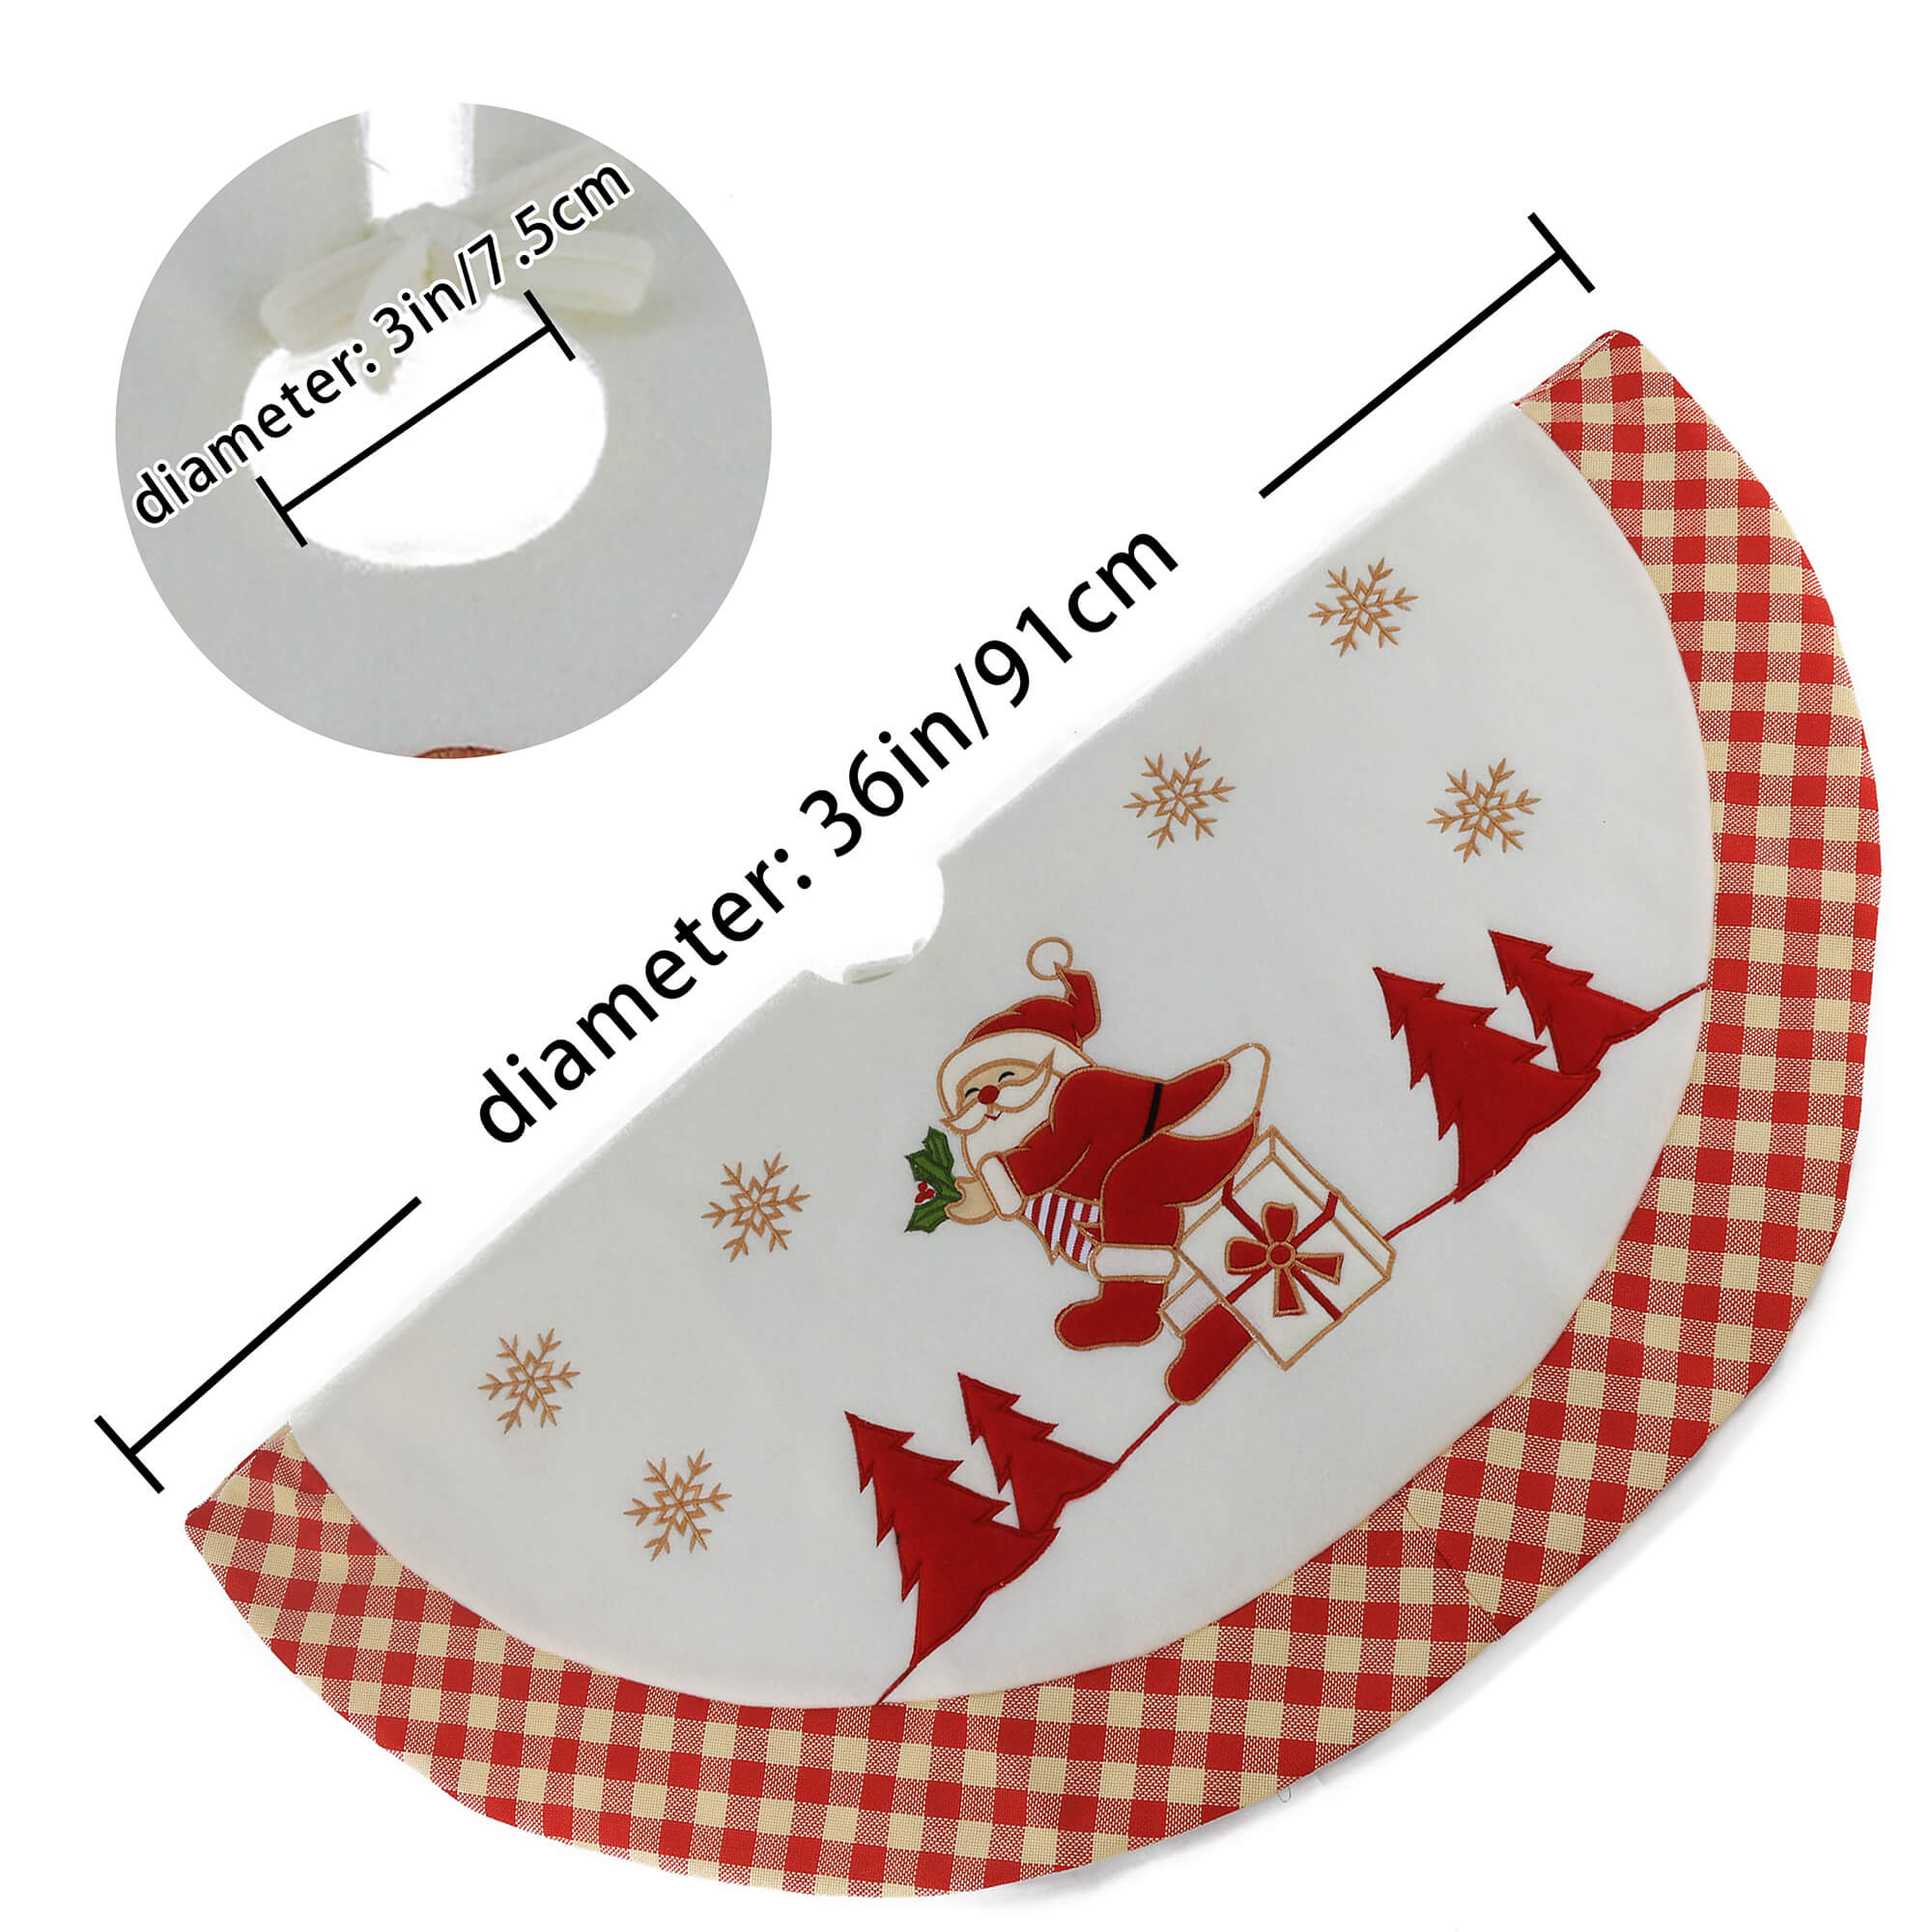 36’’ Christmas Tree Skirt with Thick Plaid Trim of 4 patterns - Glow Guards